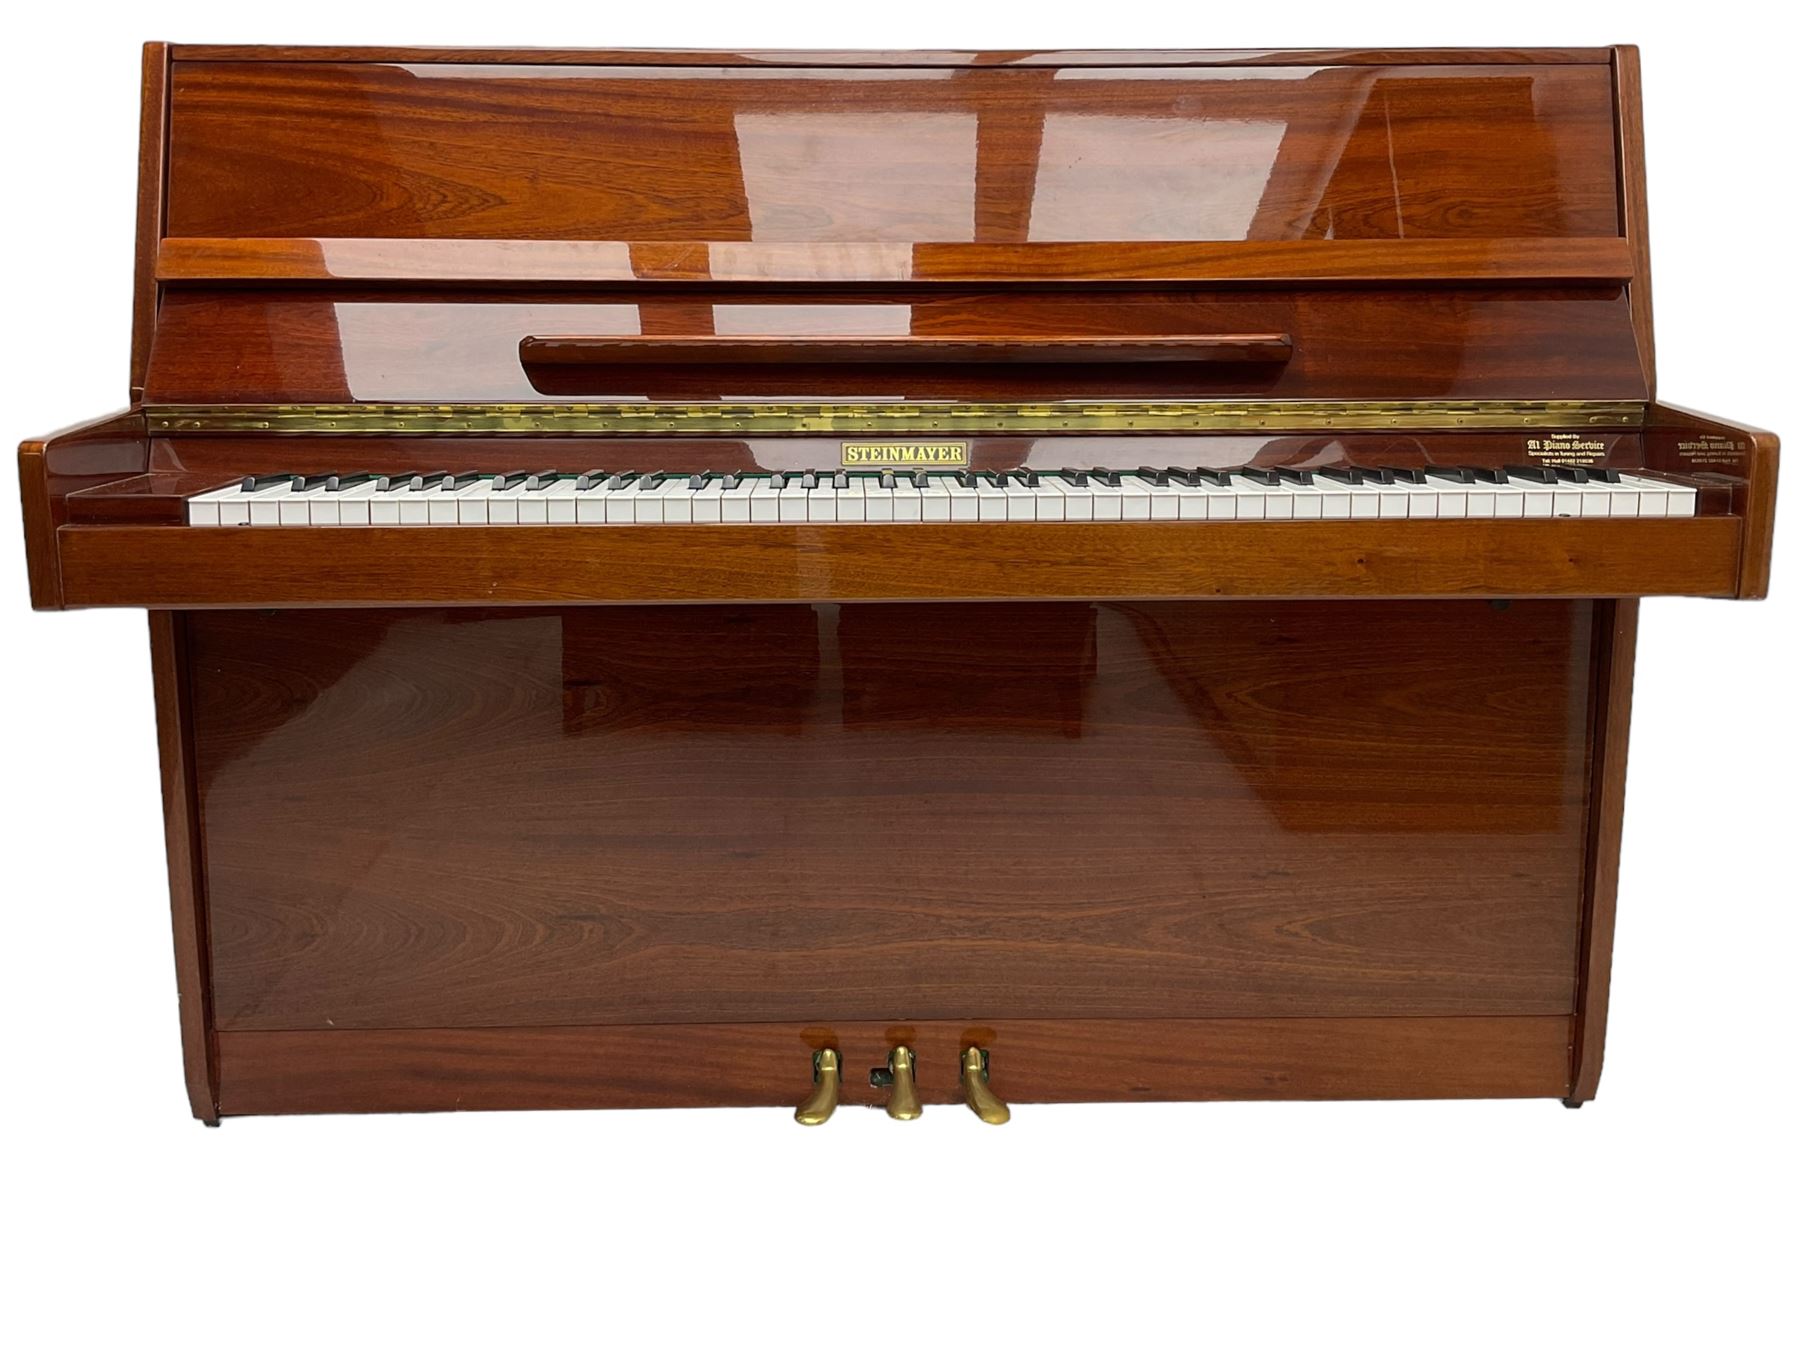 Steinmayer upright series 108 piano in sapele mahogany case - Image 4 of 11